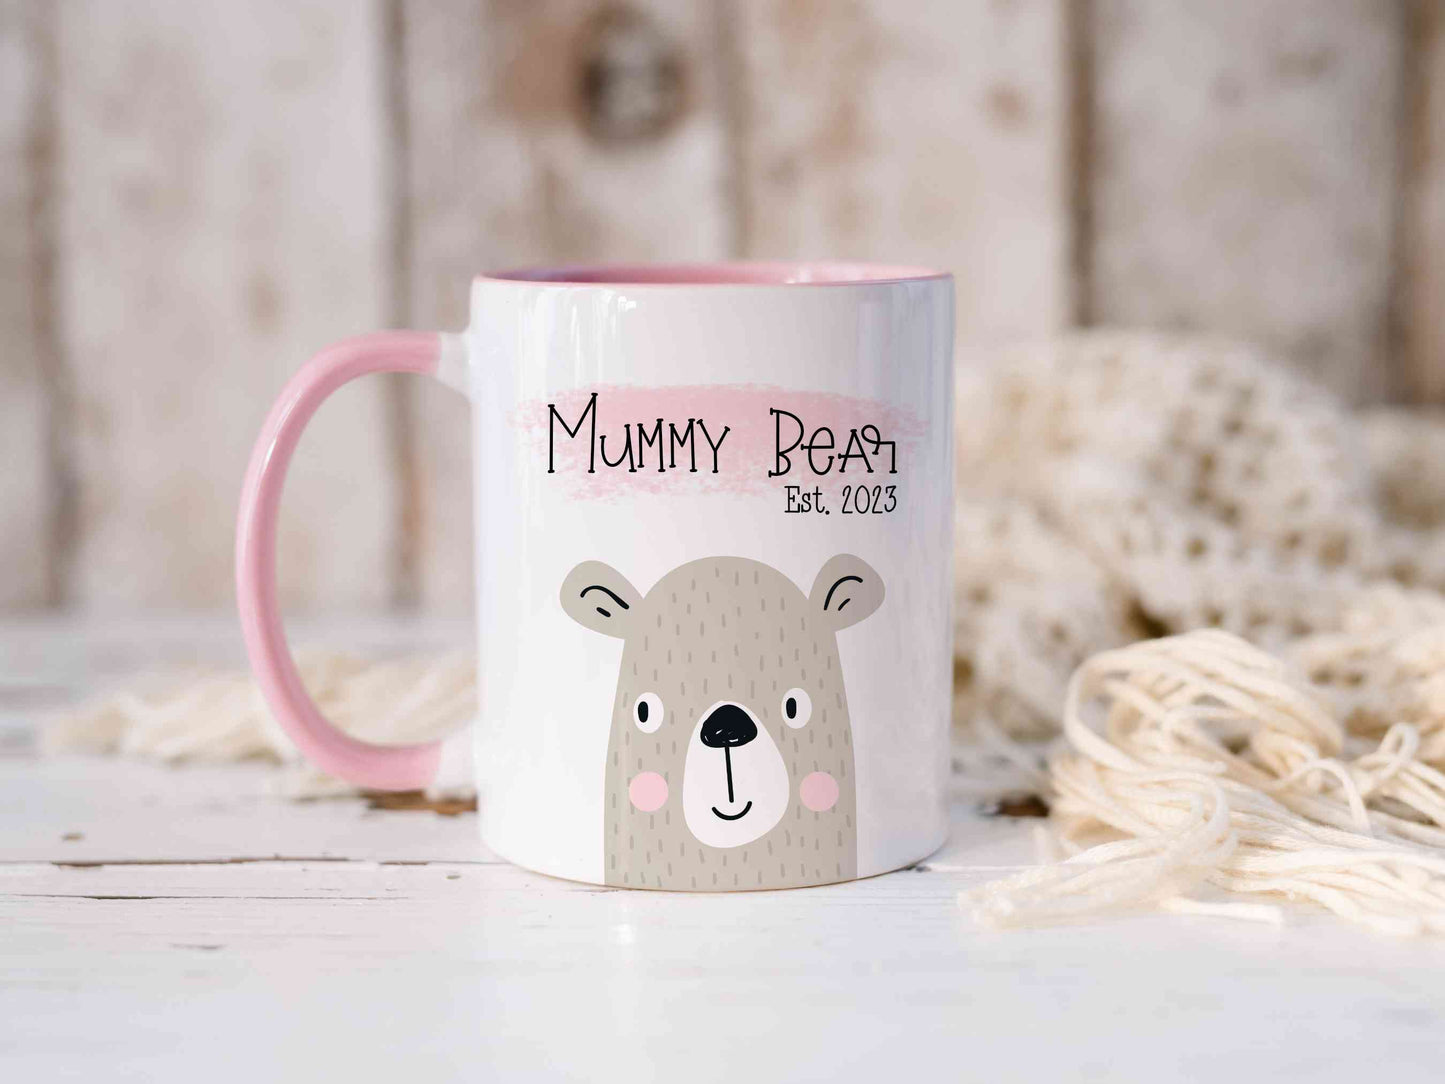 White mug with pink handle sitting on a worktop. The mug has a cute bear design printed on it with the text mummy bear above